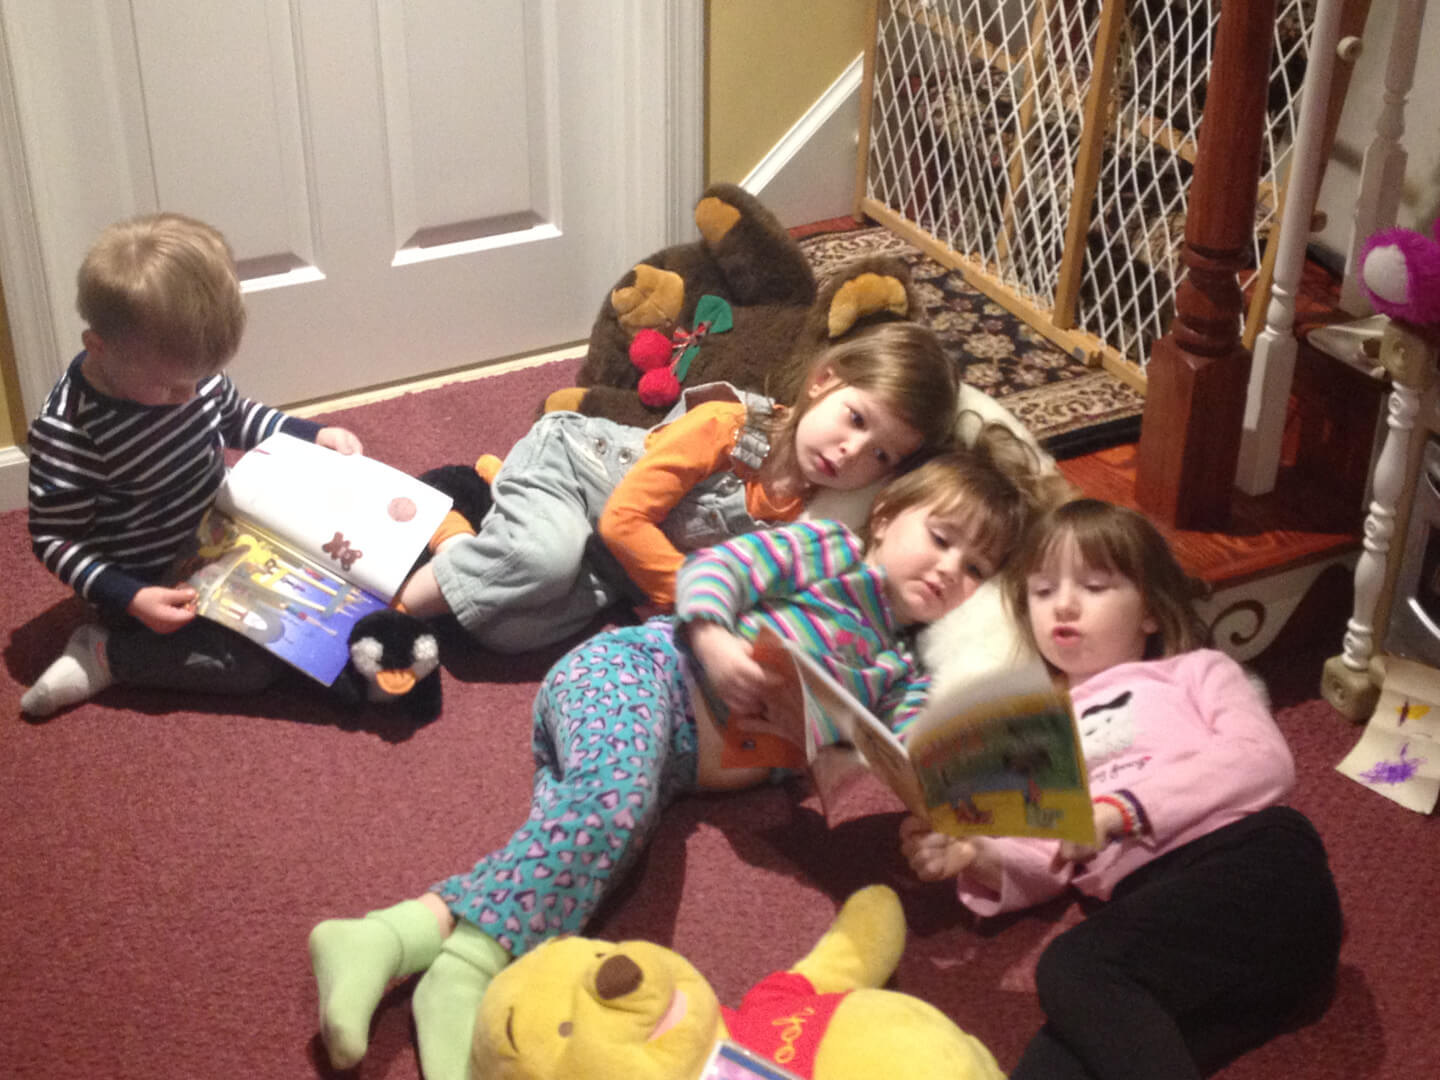 Four children reading books together